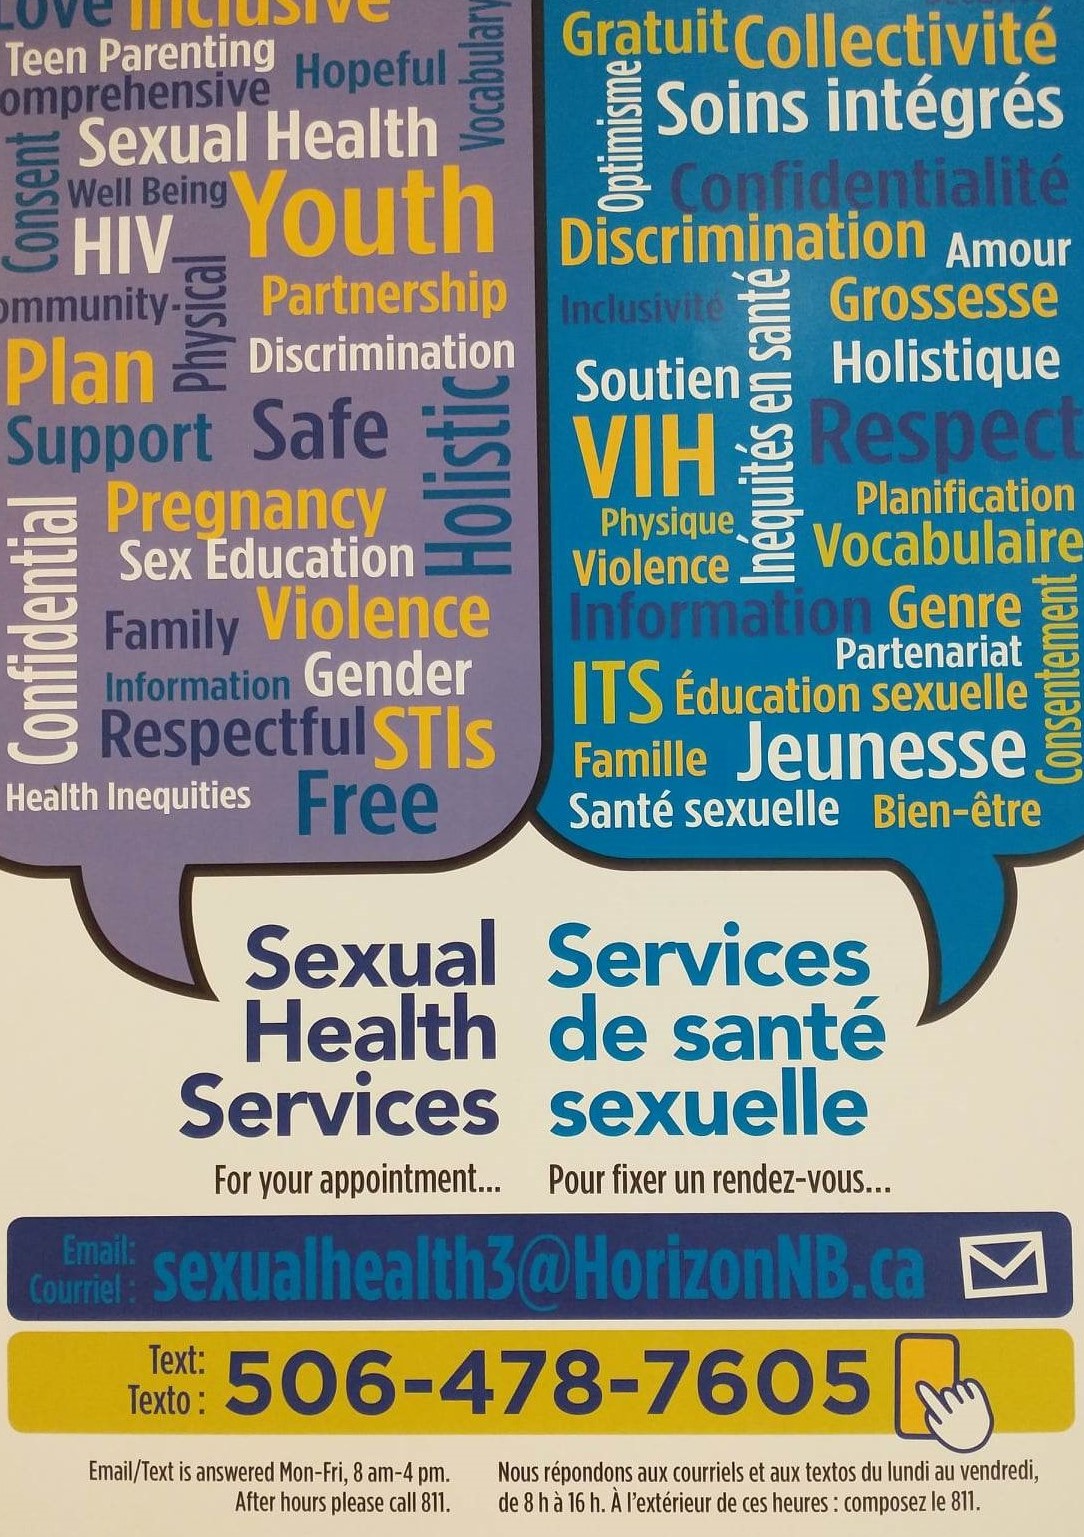 Sexual Health Services (3).jpg